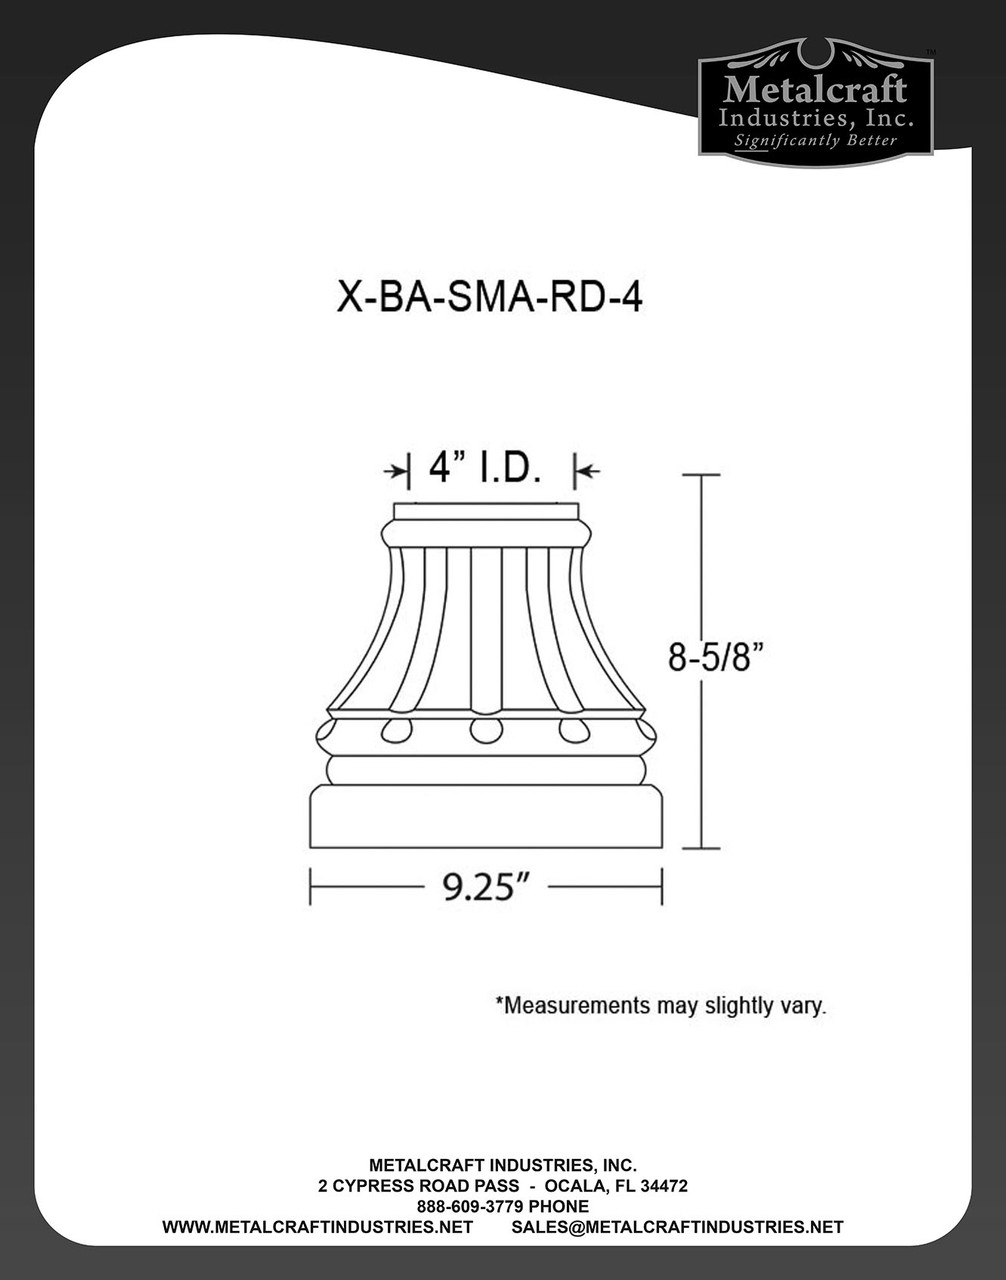 X-BA-SMA-RD-4
SPECIFICATION DRAWING